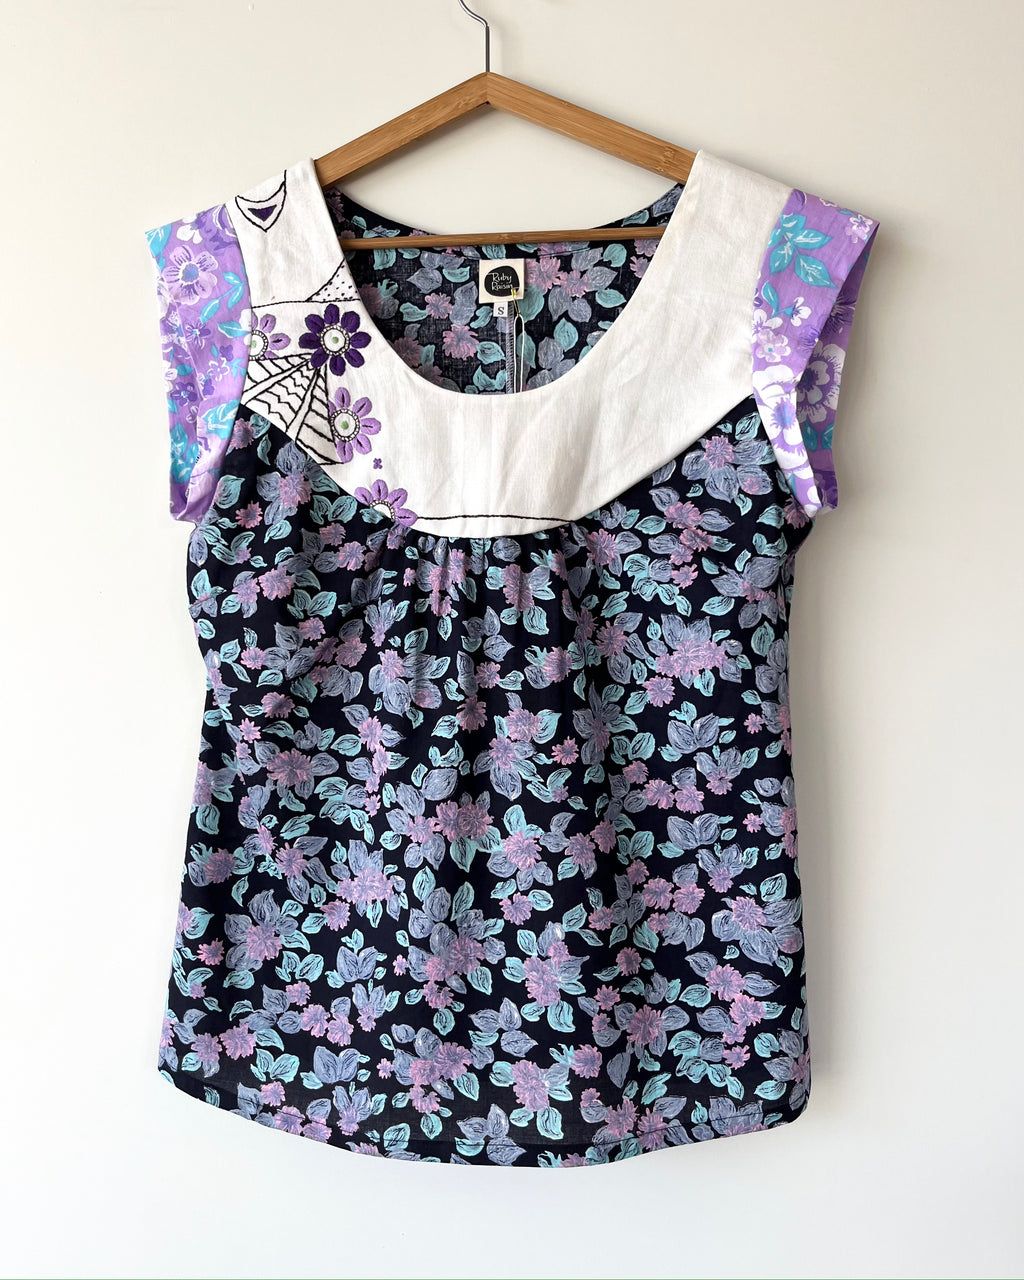 Collage Top Vintage Purple Embroidery S, XL